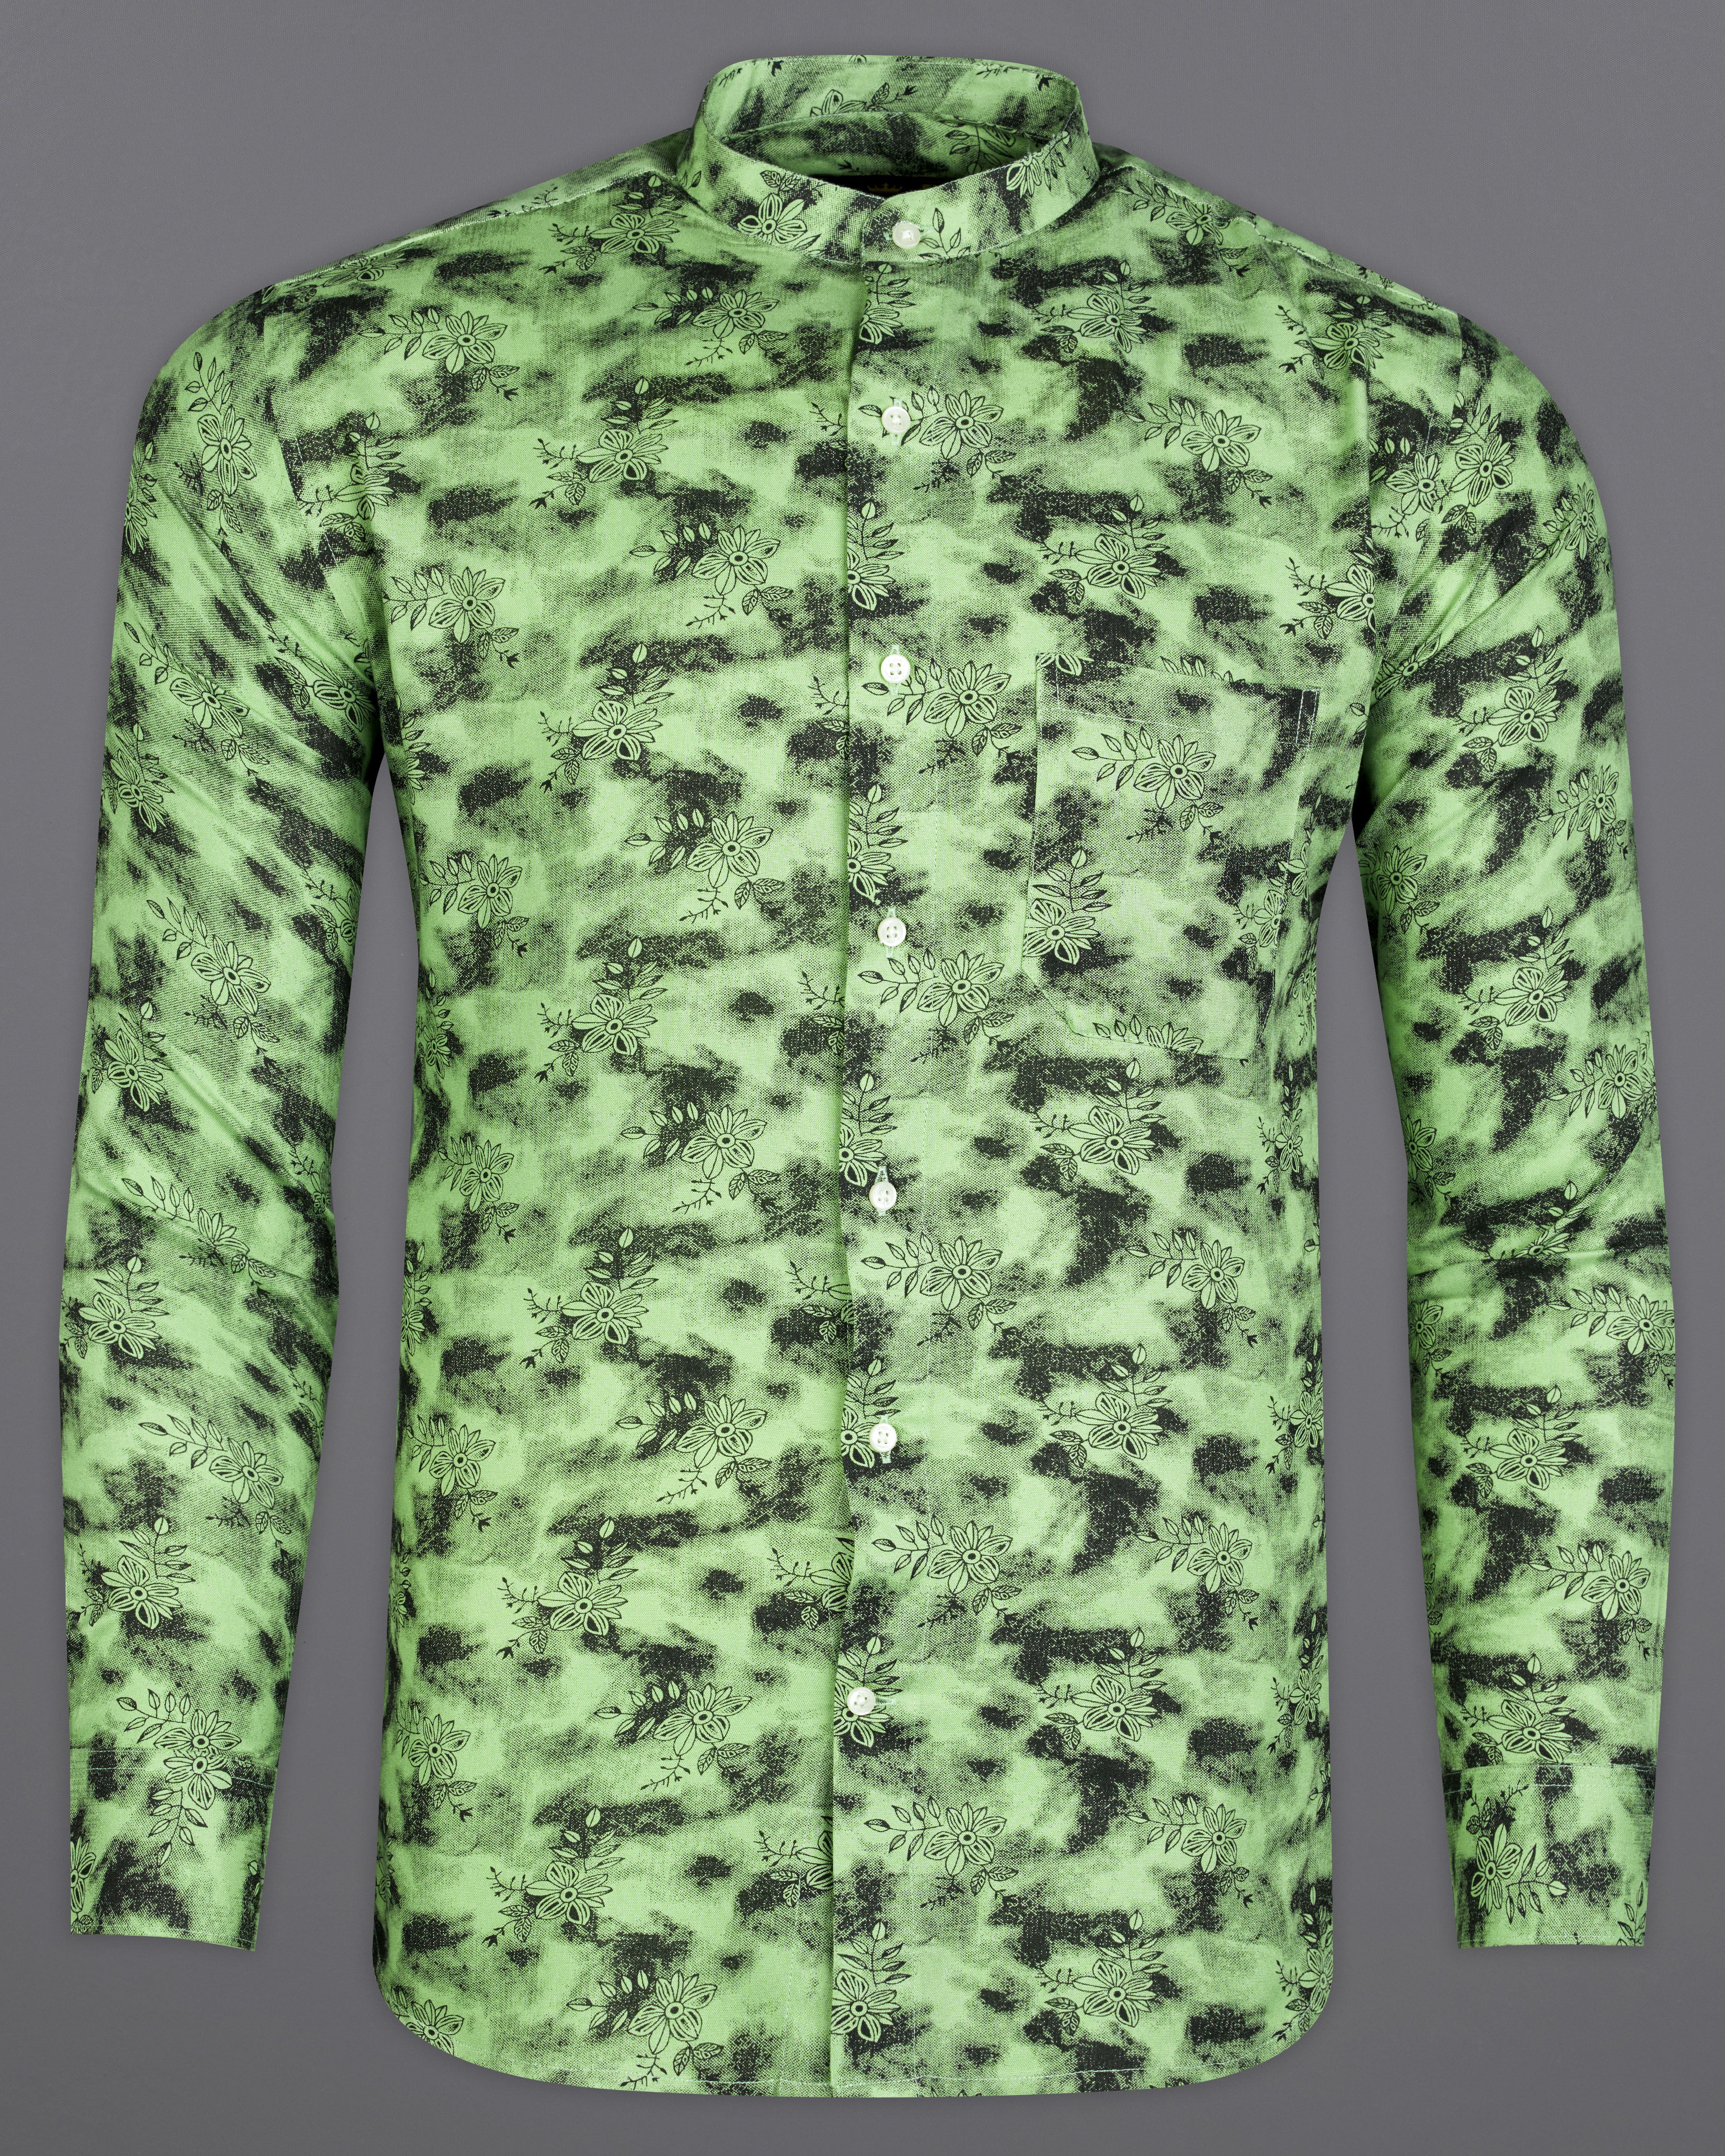 Coriander Green and Black Floral Textured Premium Tencel Shirt 10001-M-38, 10001-M-H-38, 10001-M-39, 10001-M-H-39, 10001-M-40, 10001-M-H-40, 10001-M-42, 10001-M-H-42, 10001-M-44, 10001-M-H-44, 10001-M-46, 10001-M-H-46, 10001-M-48, 10001-M-H-48, 10001-M-50, 10001-M-H-50, 10001-M-52, 10001-M-H-52